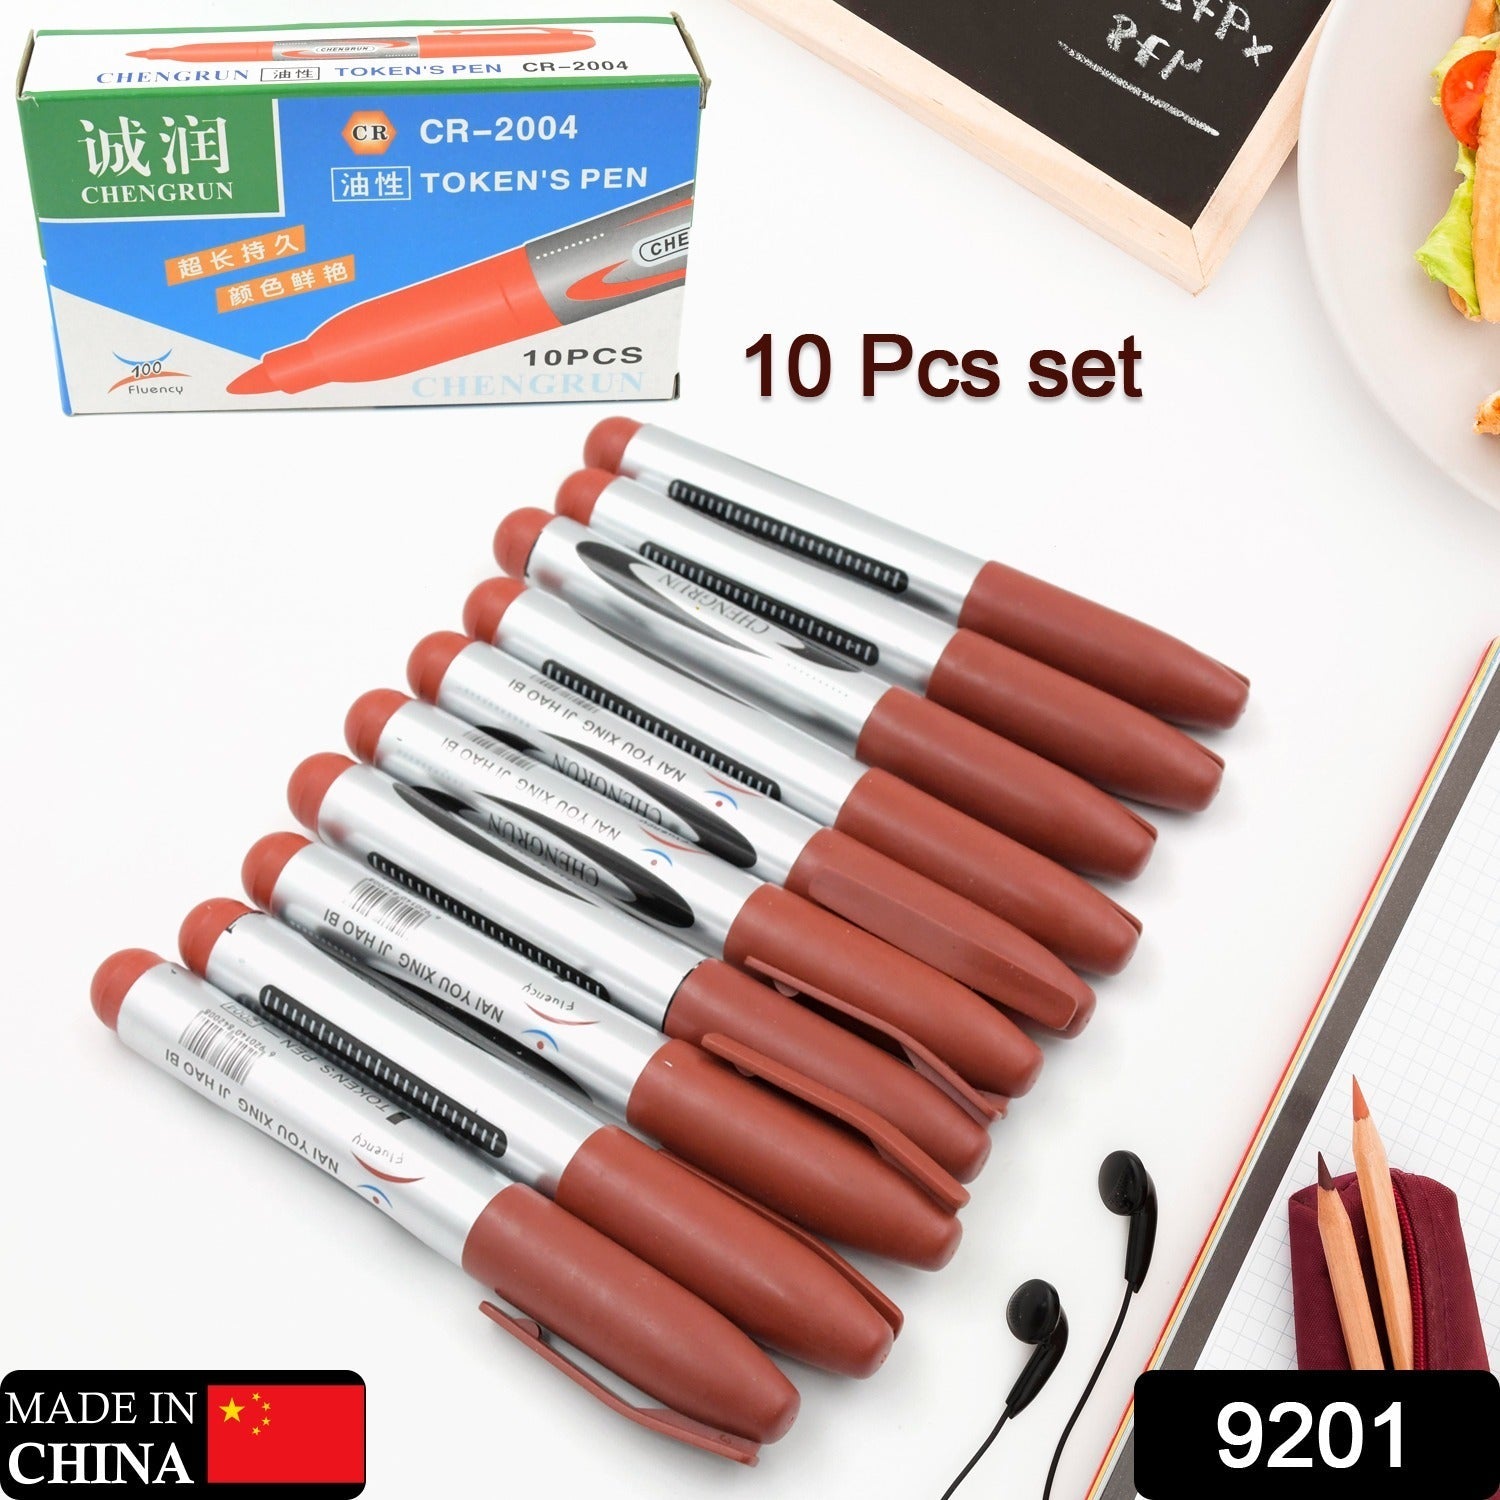 9201 10Pc Marron Marker and pen used in studies and teaching white boards in schools and institutes for students (10 Pc Set)